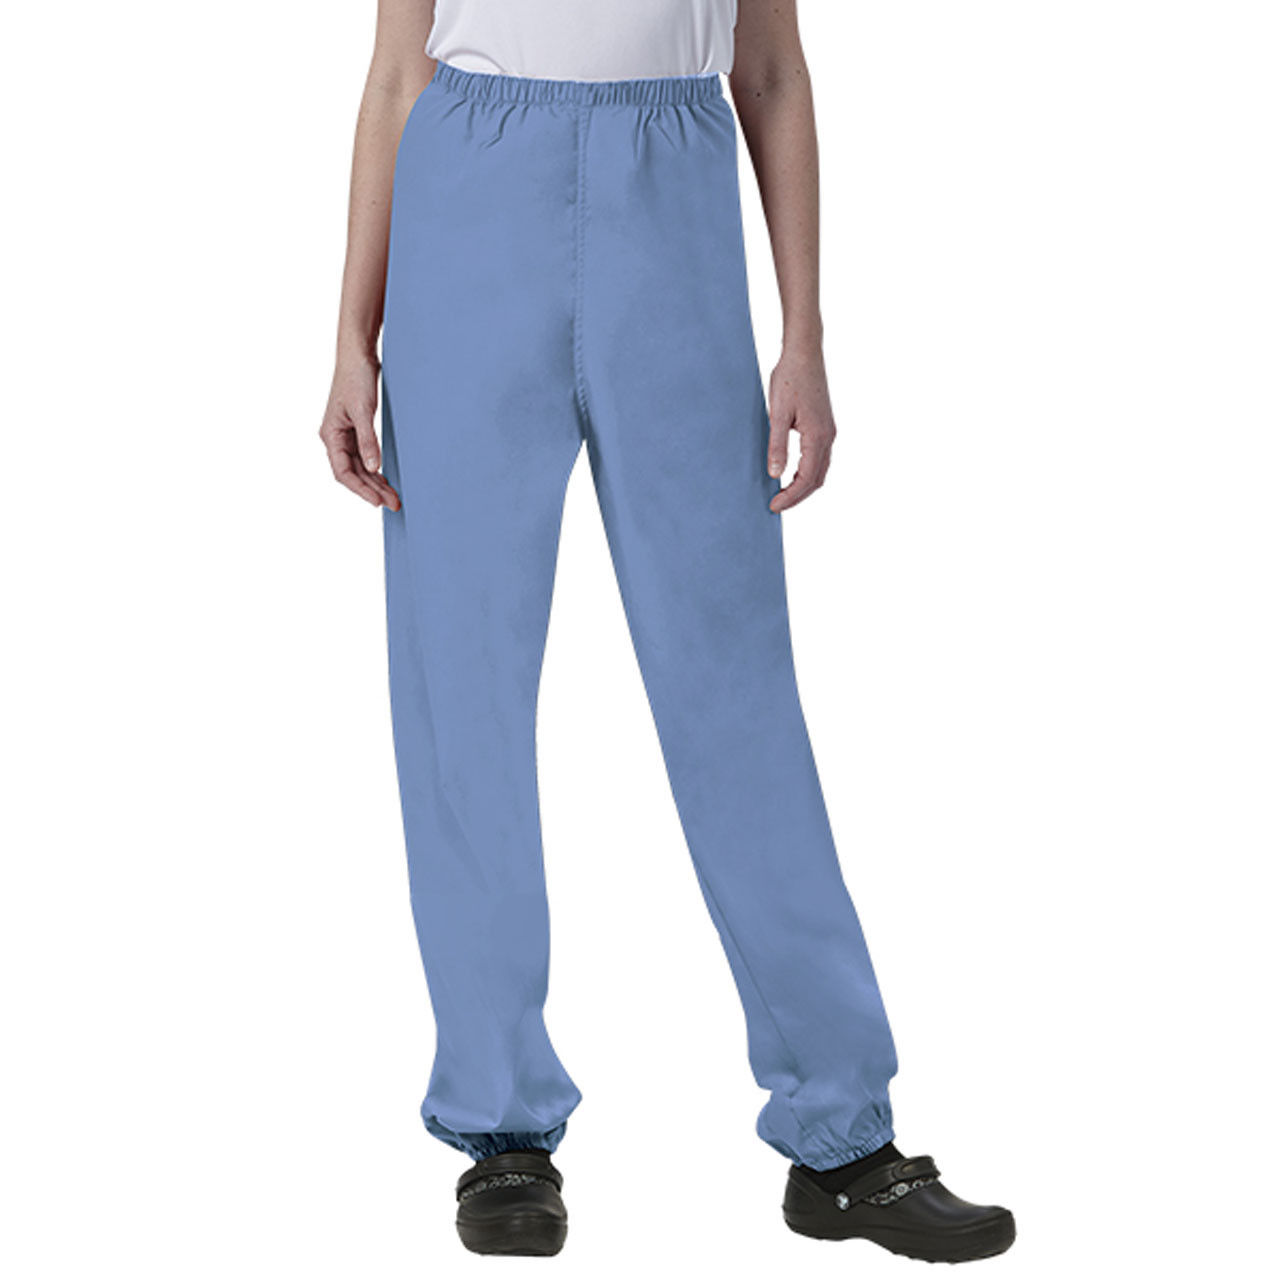 Do polyester elastic waistband wholesalers offer scrub pants with pockets?